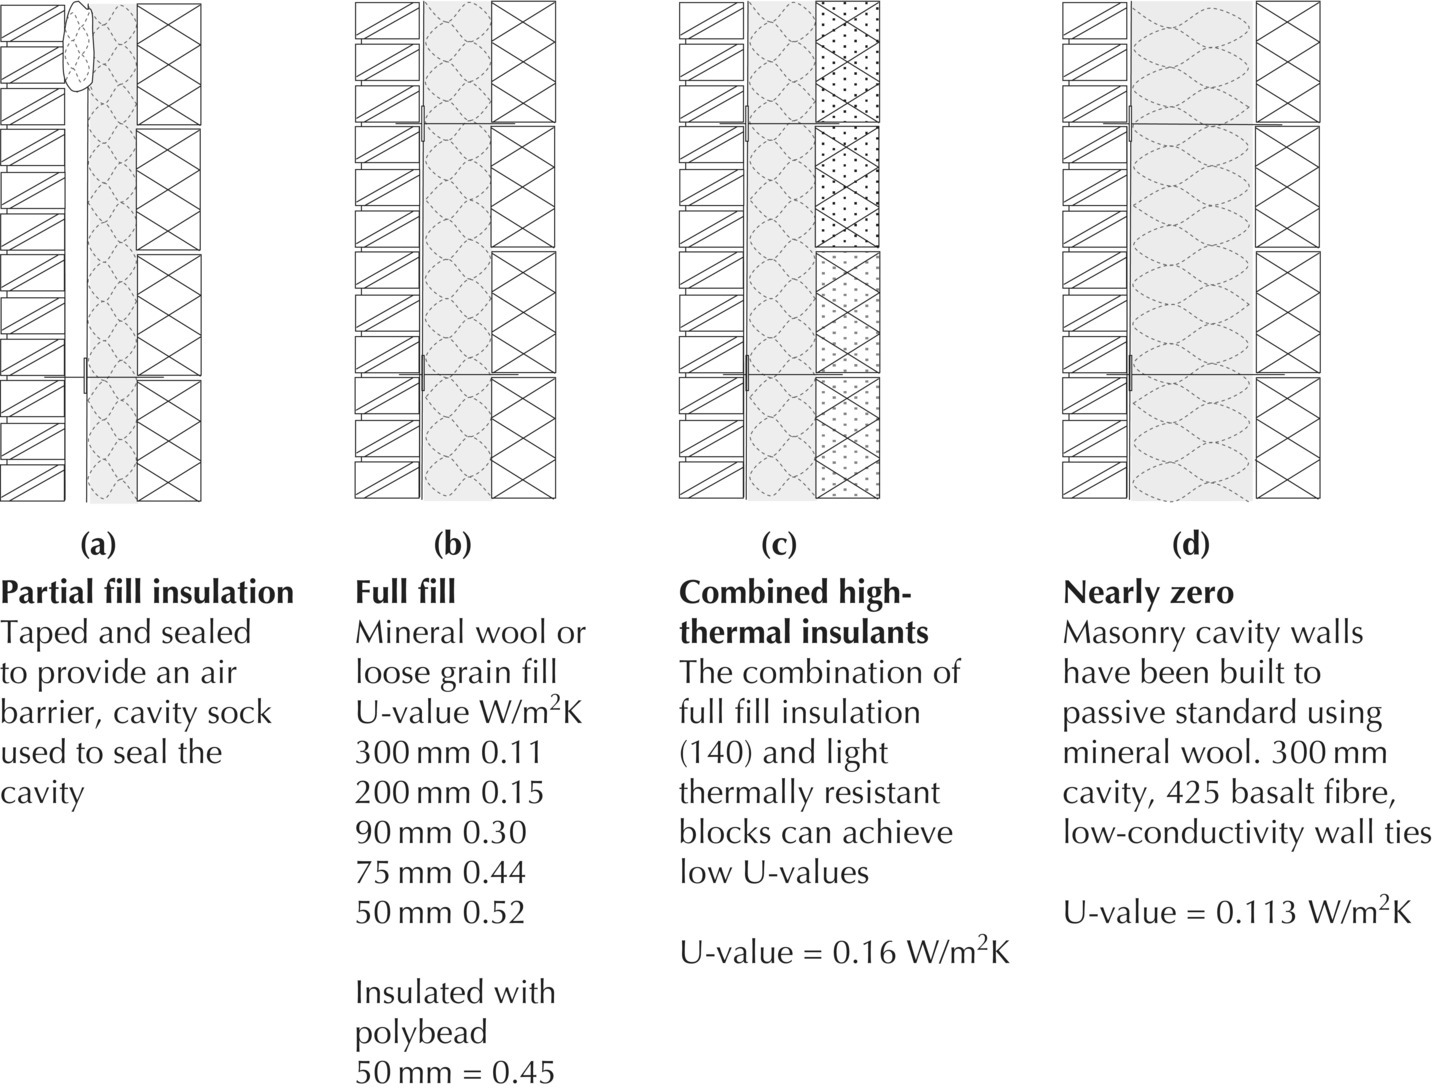 4 Illustrations of thermally resistant cavity wall construction, displaying partial fill insulation (a), full fill (b), combined thermal insultants (c), and nearly zero (d).